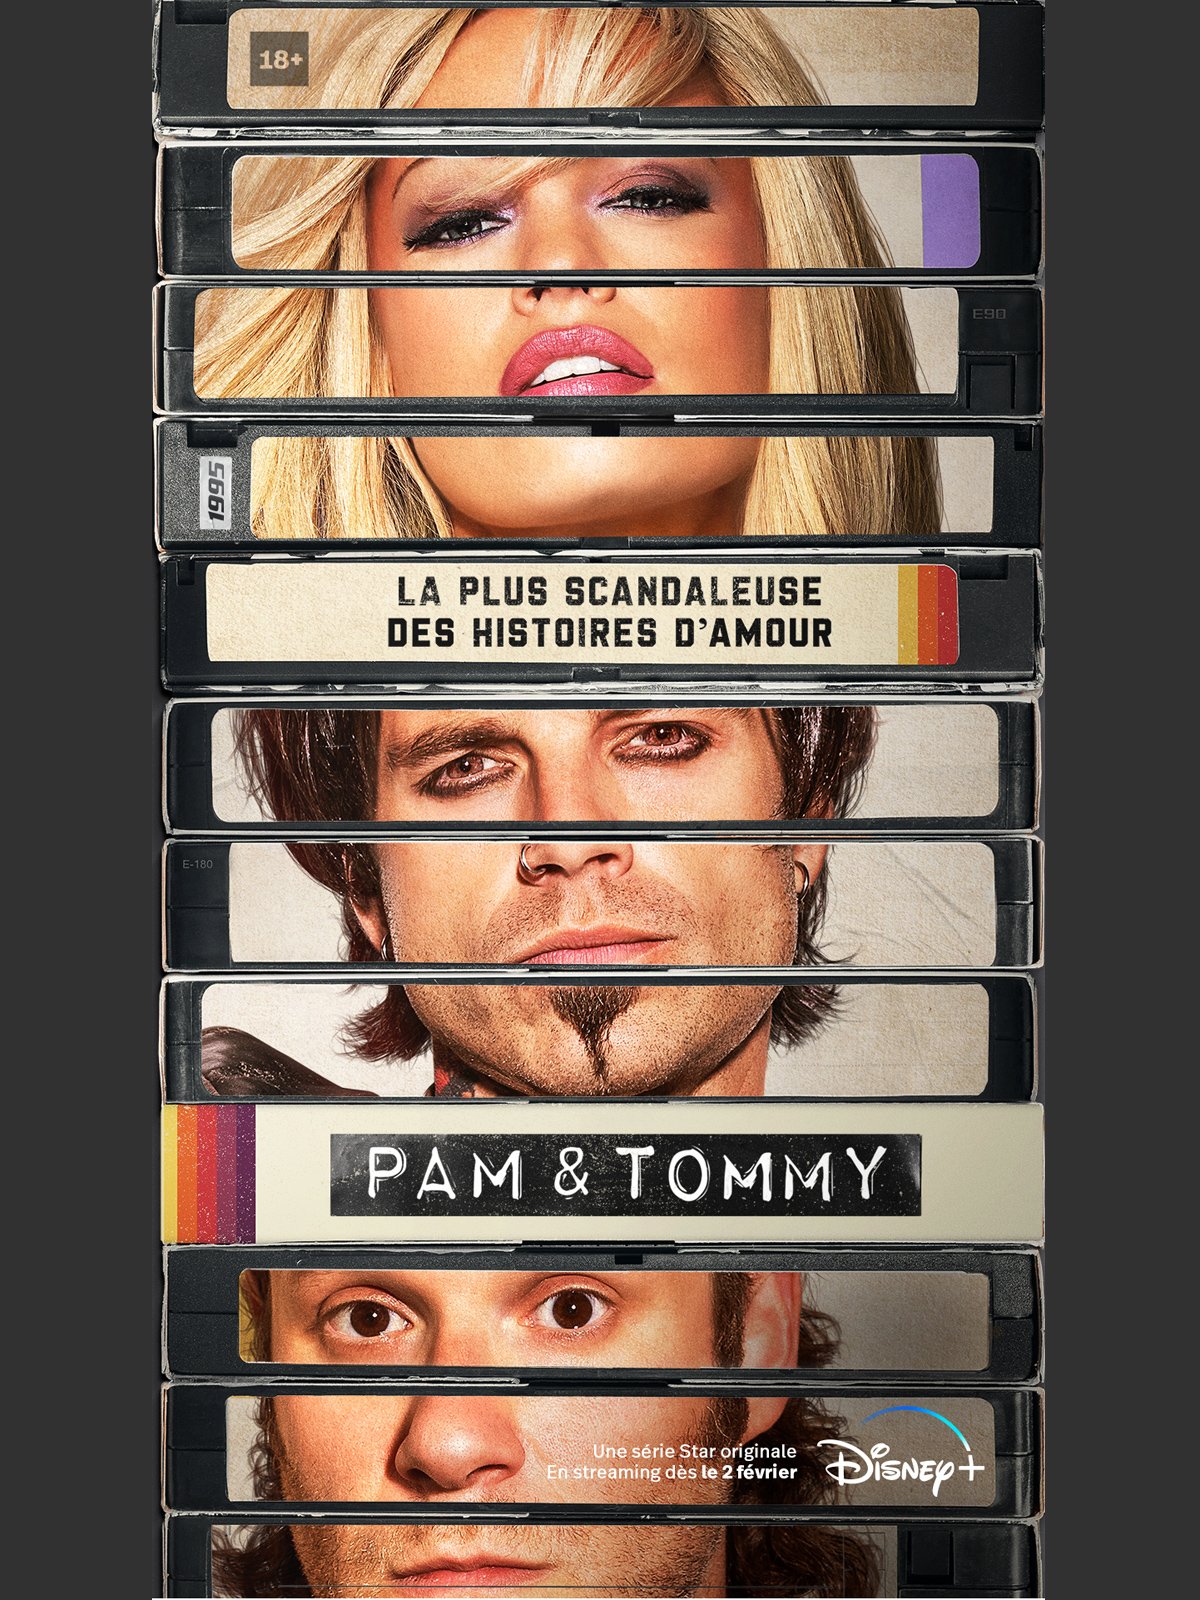 Pam & Tommy - Série TV 2022 streaming VF gratuit complet